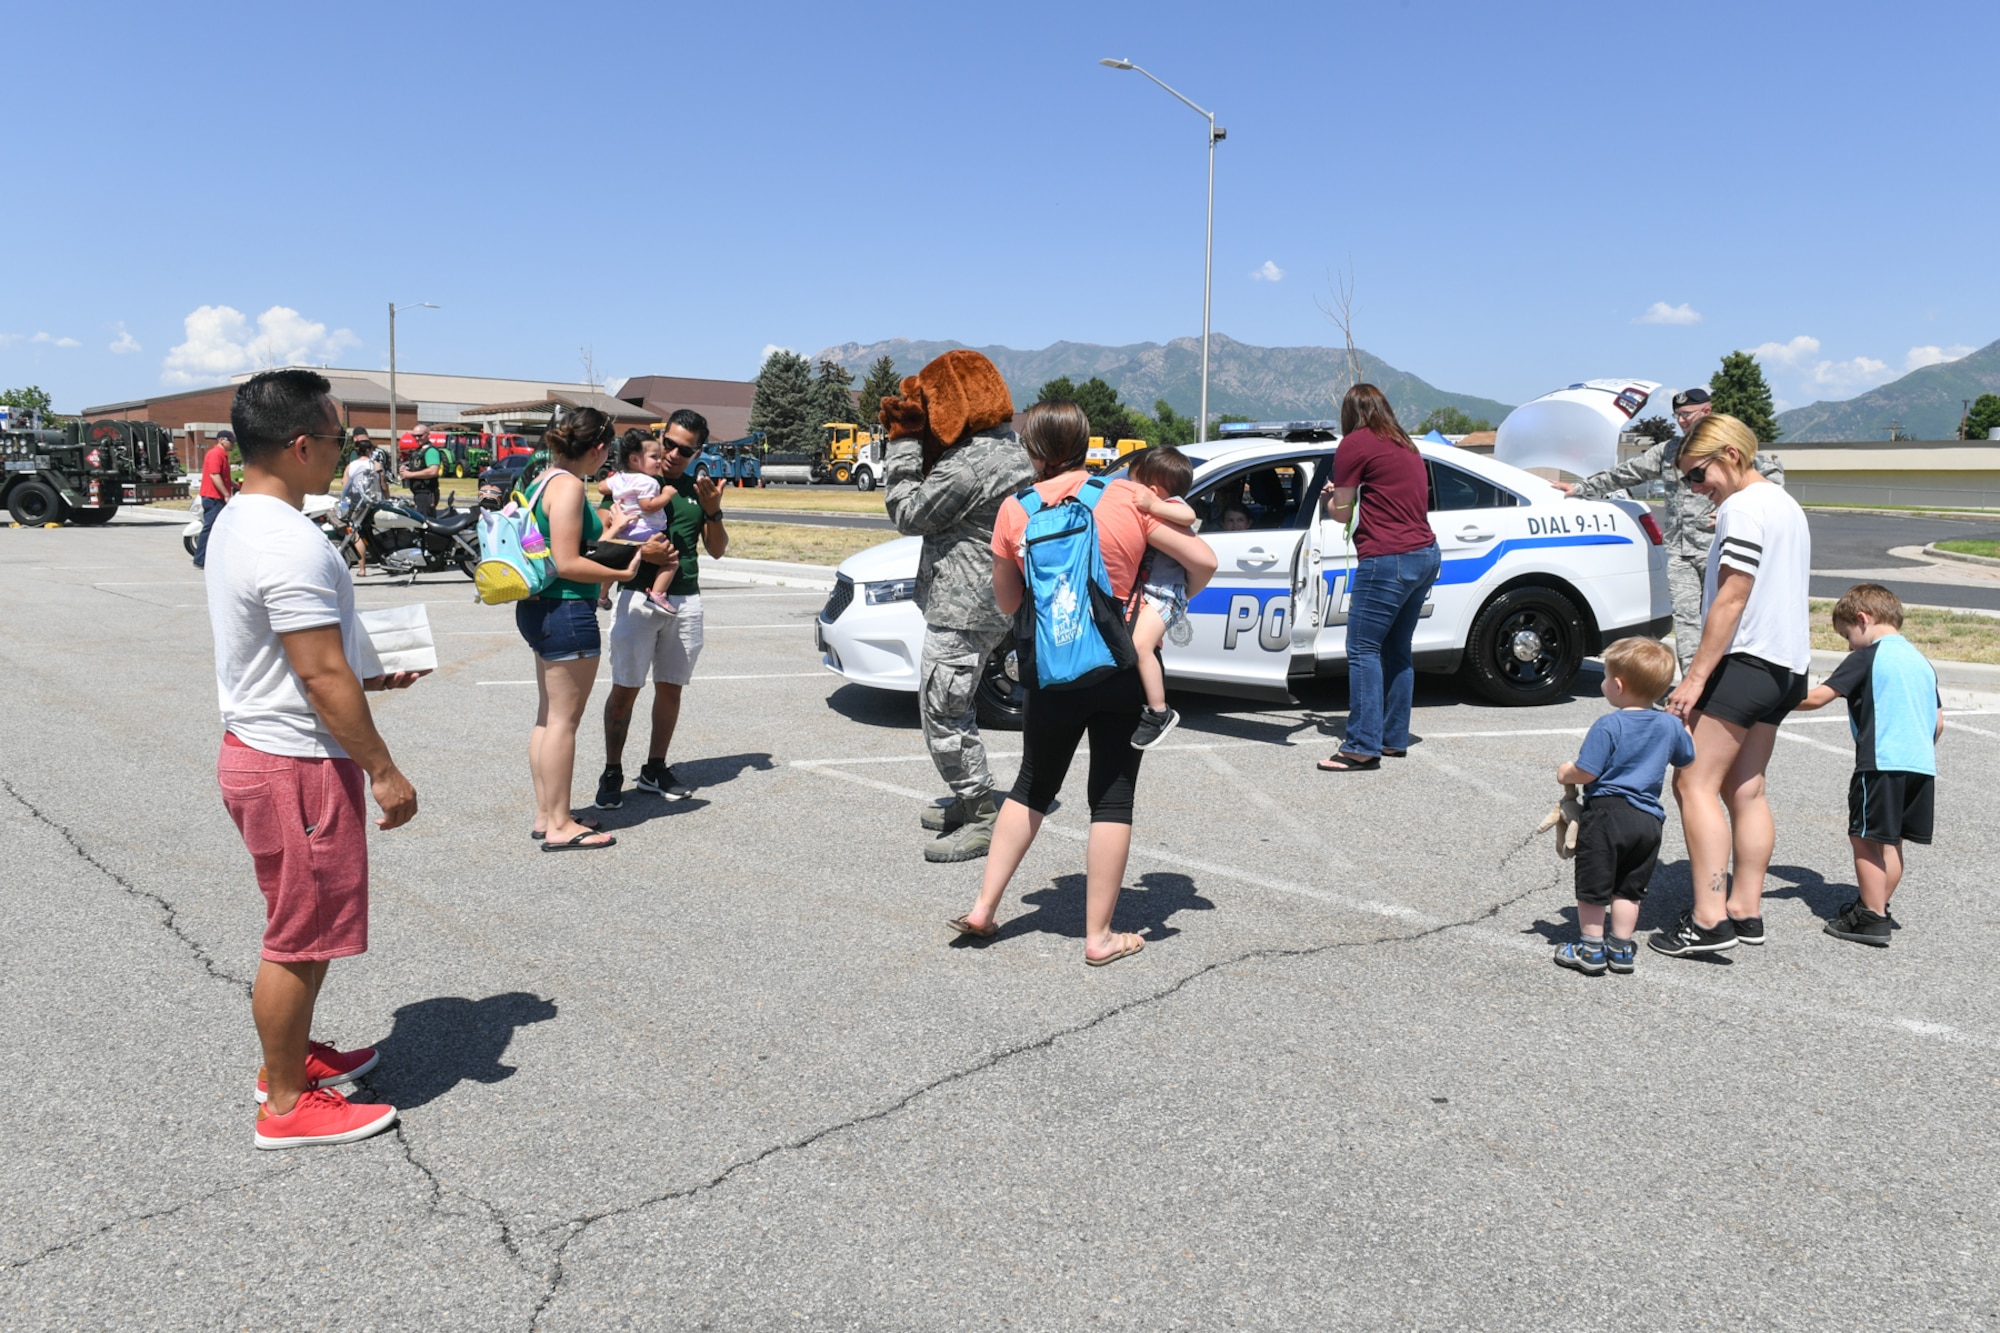 Visitors interact with 75th Security Forces and view one of their vehicles during Wheels of Wonder June 8, 2018, at Hill Air Force Base, Utah. Wheels of Wonder provides base families a fun, hands-on experience exploring various types of vehicles.